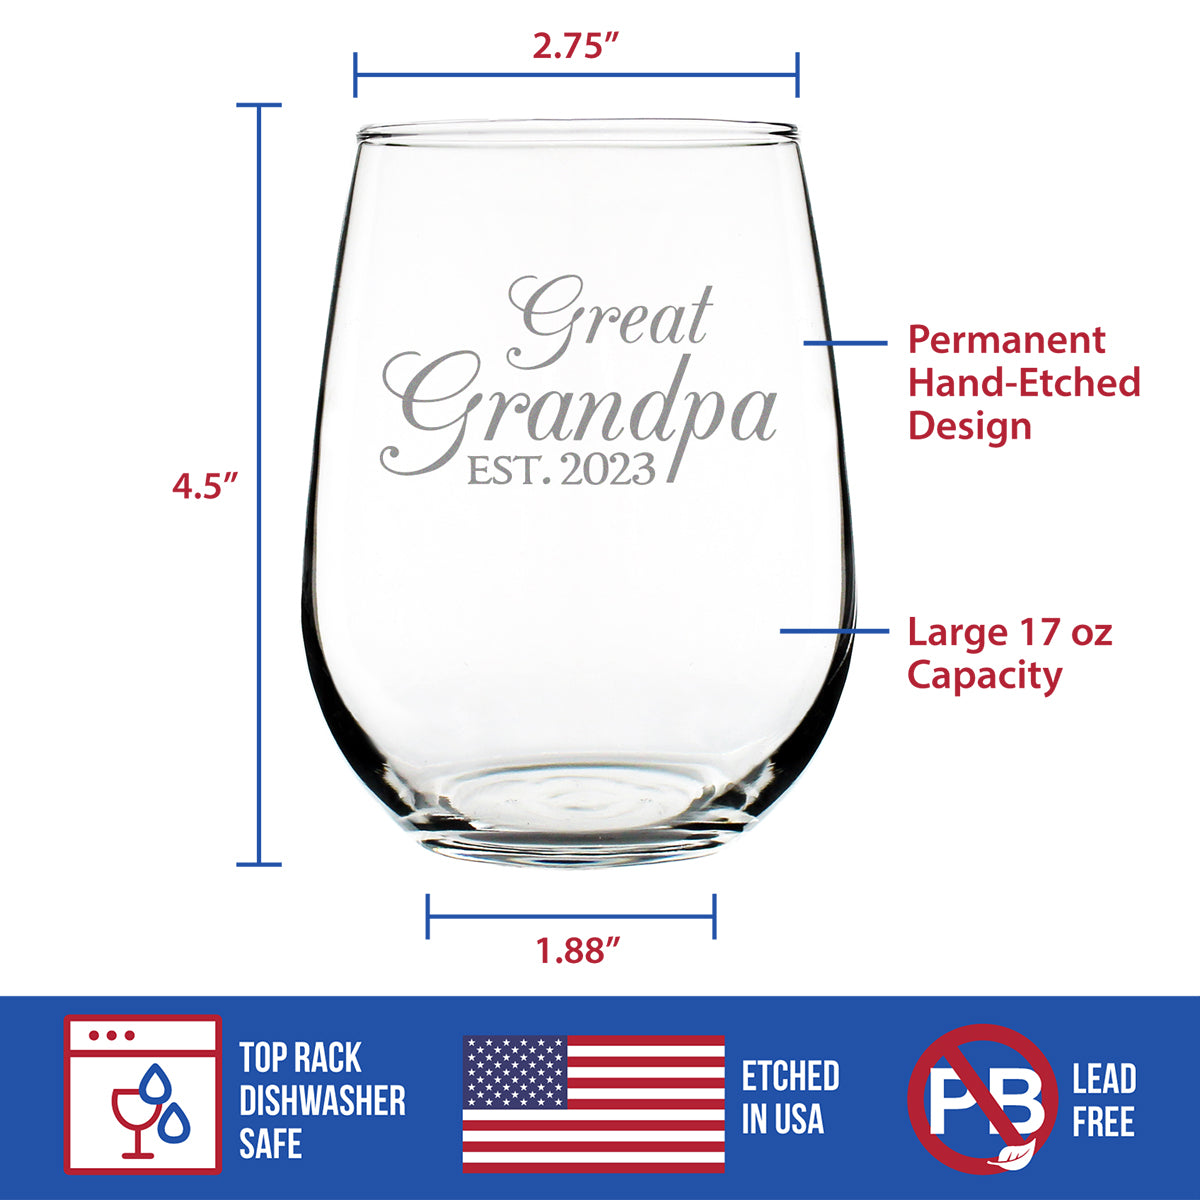 Great Grandpa Est 2023 - New Great Grandfather Stemless Wine Glass Gift for First Time Great Grandparents - Decorative 17 Oz Large Glasses